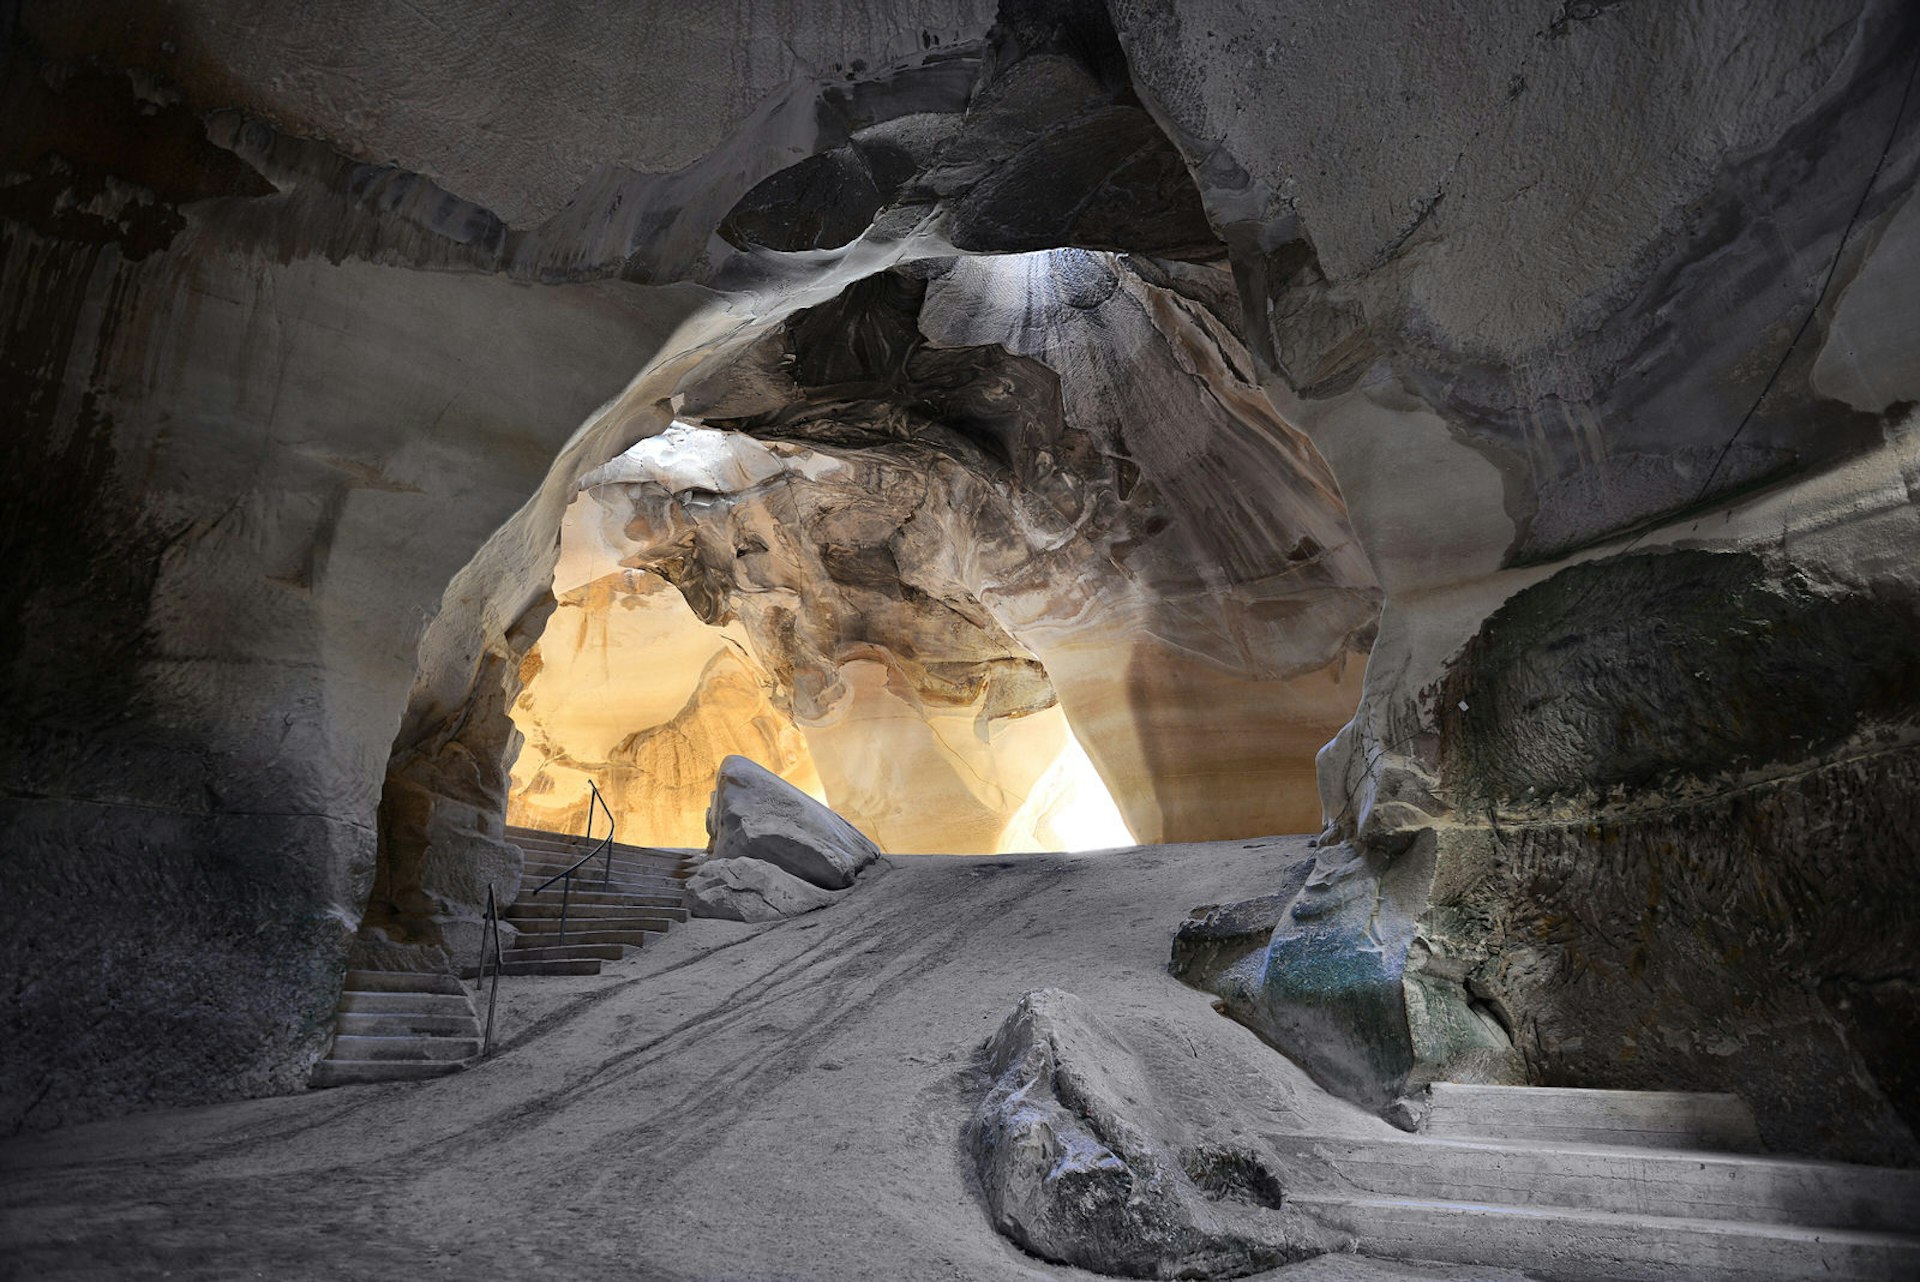 An ancient quarry, dug during between 7th and 10th centuries. Located at the city of Beit Guvrin, which was founded on the ruins of the biblical city of Maresha. Image by Nika Lerman / Shutterstock